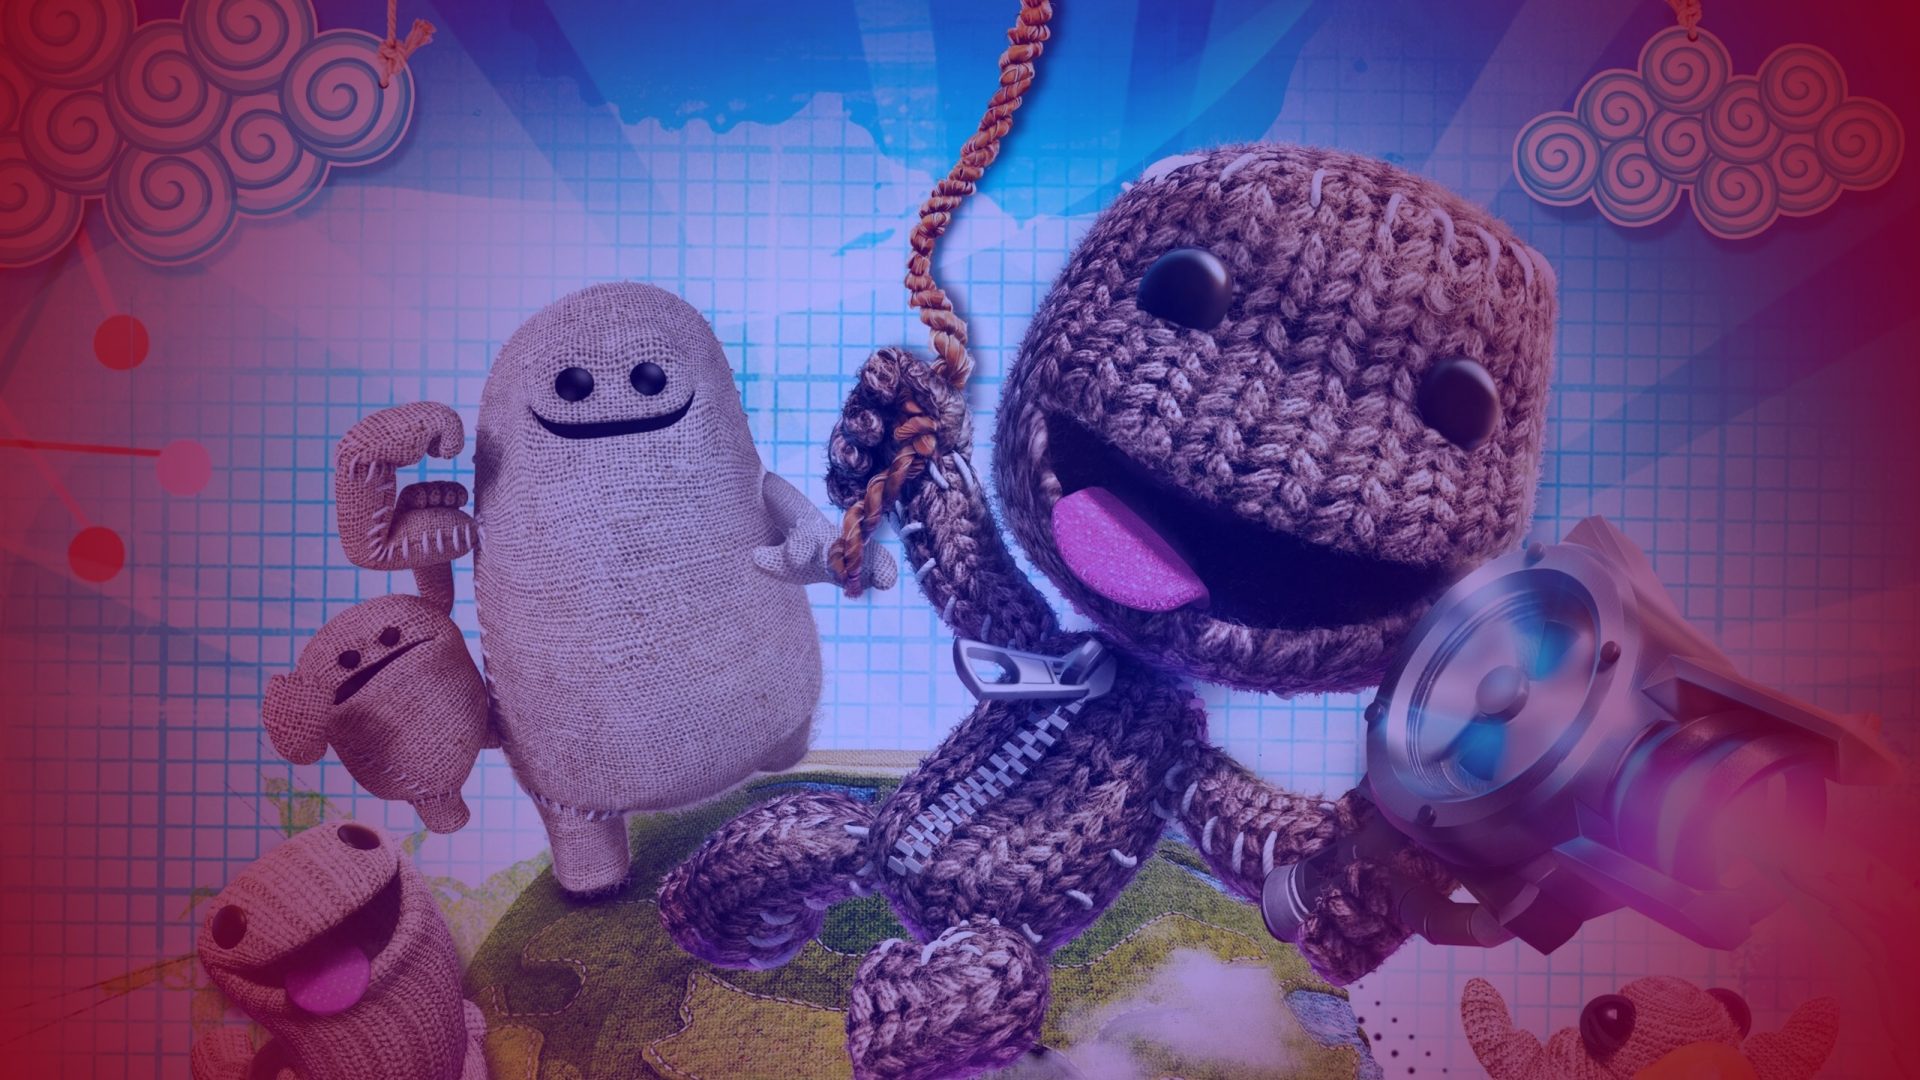 LittleBigPlanet 3 PS4 Connectivity Issues: Here’s What We Know